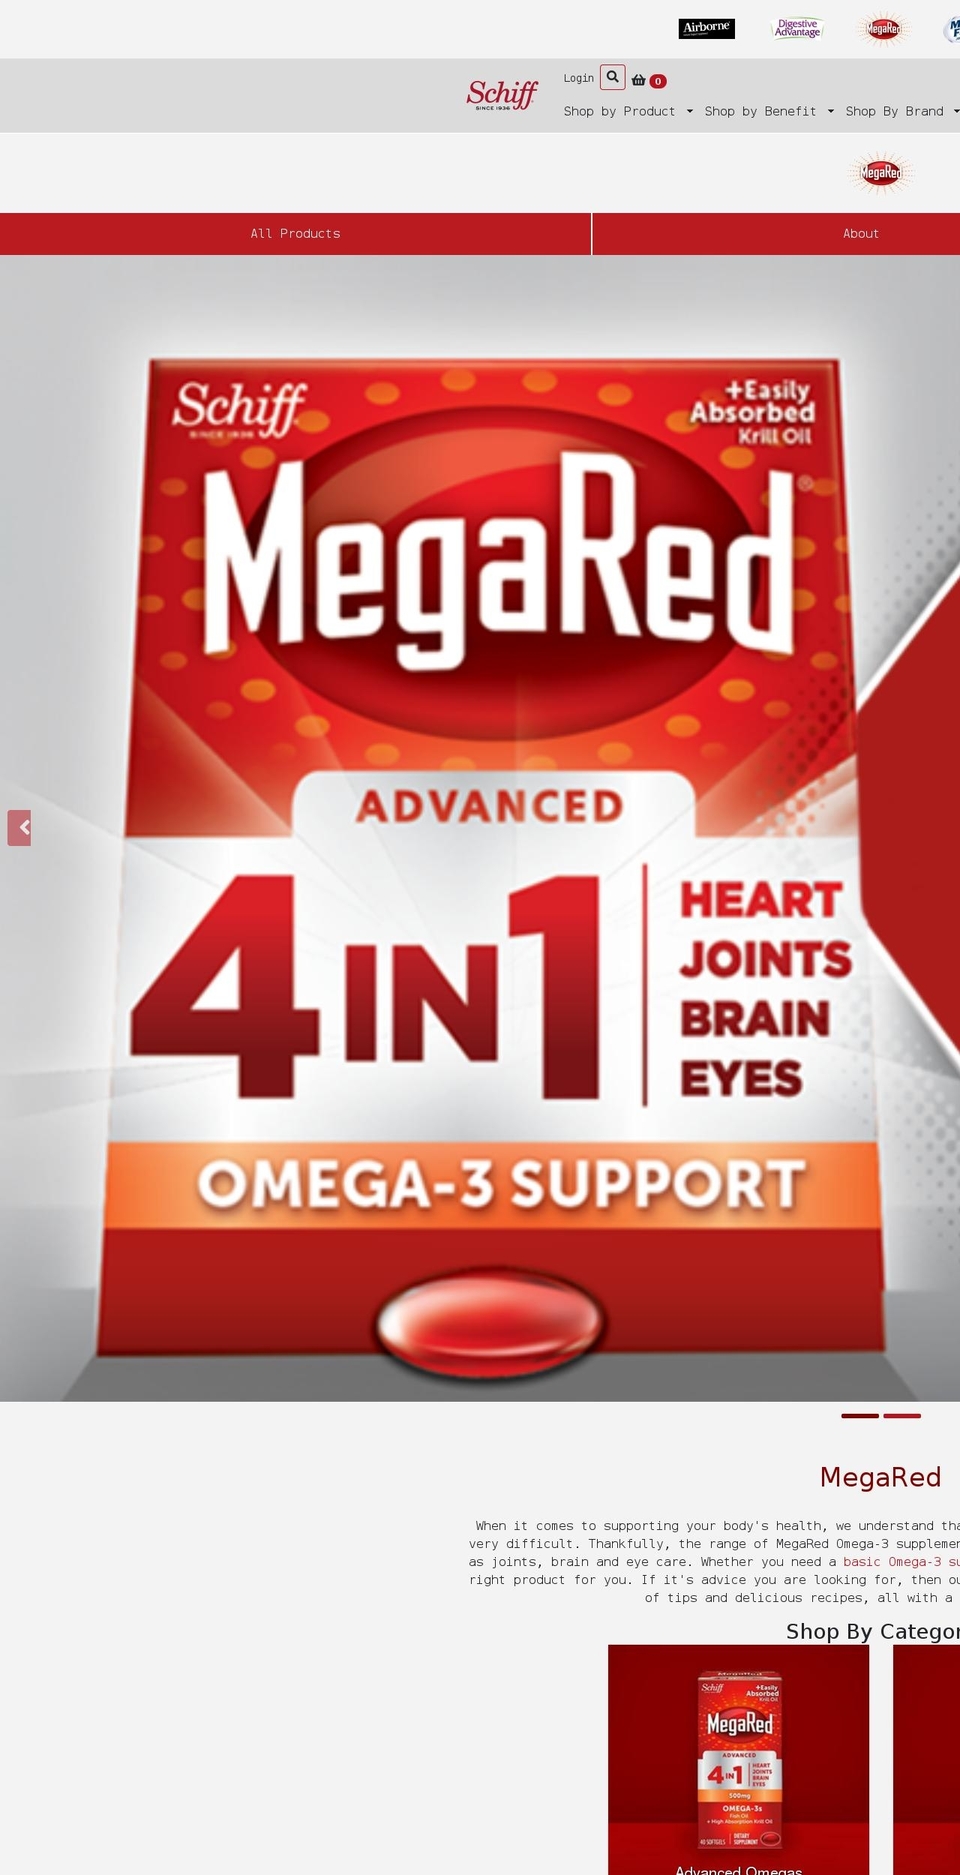 Schiff Vitamins - Updated 8\/3 Shopify theme site example mega-red.us